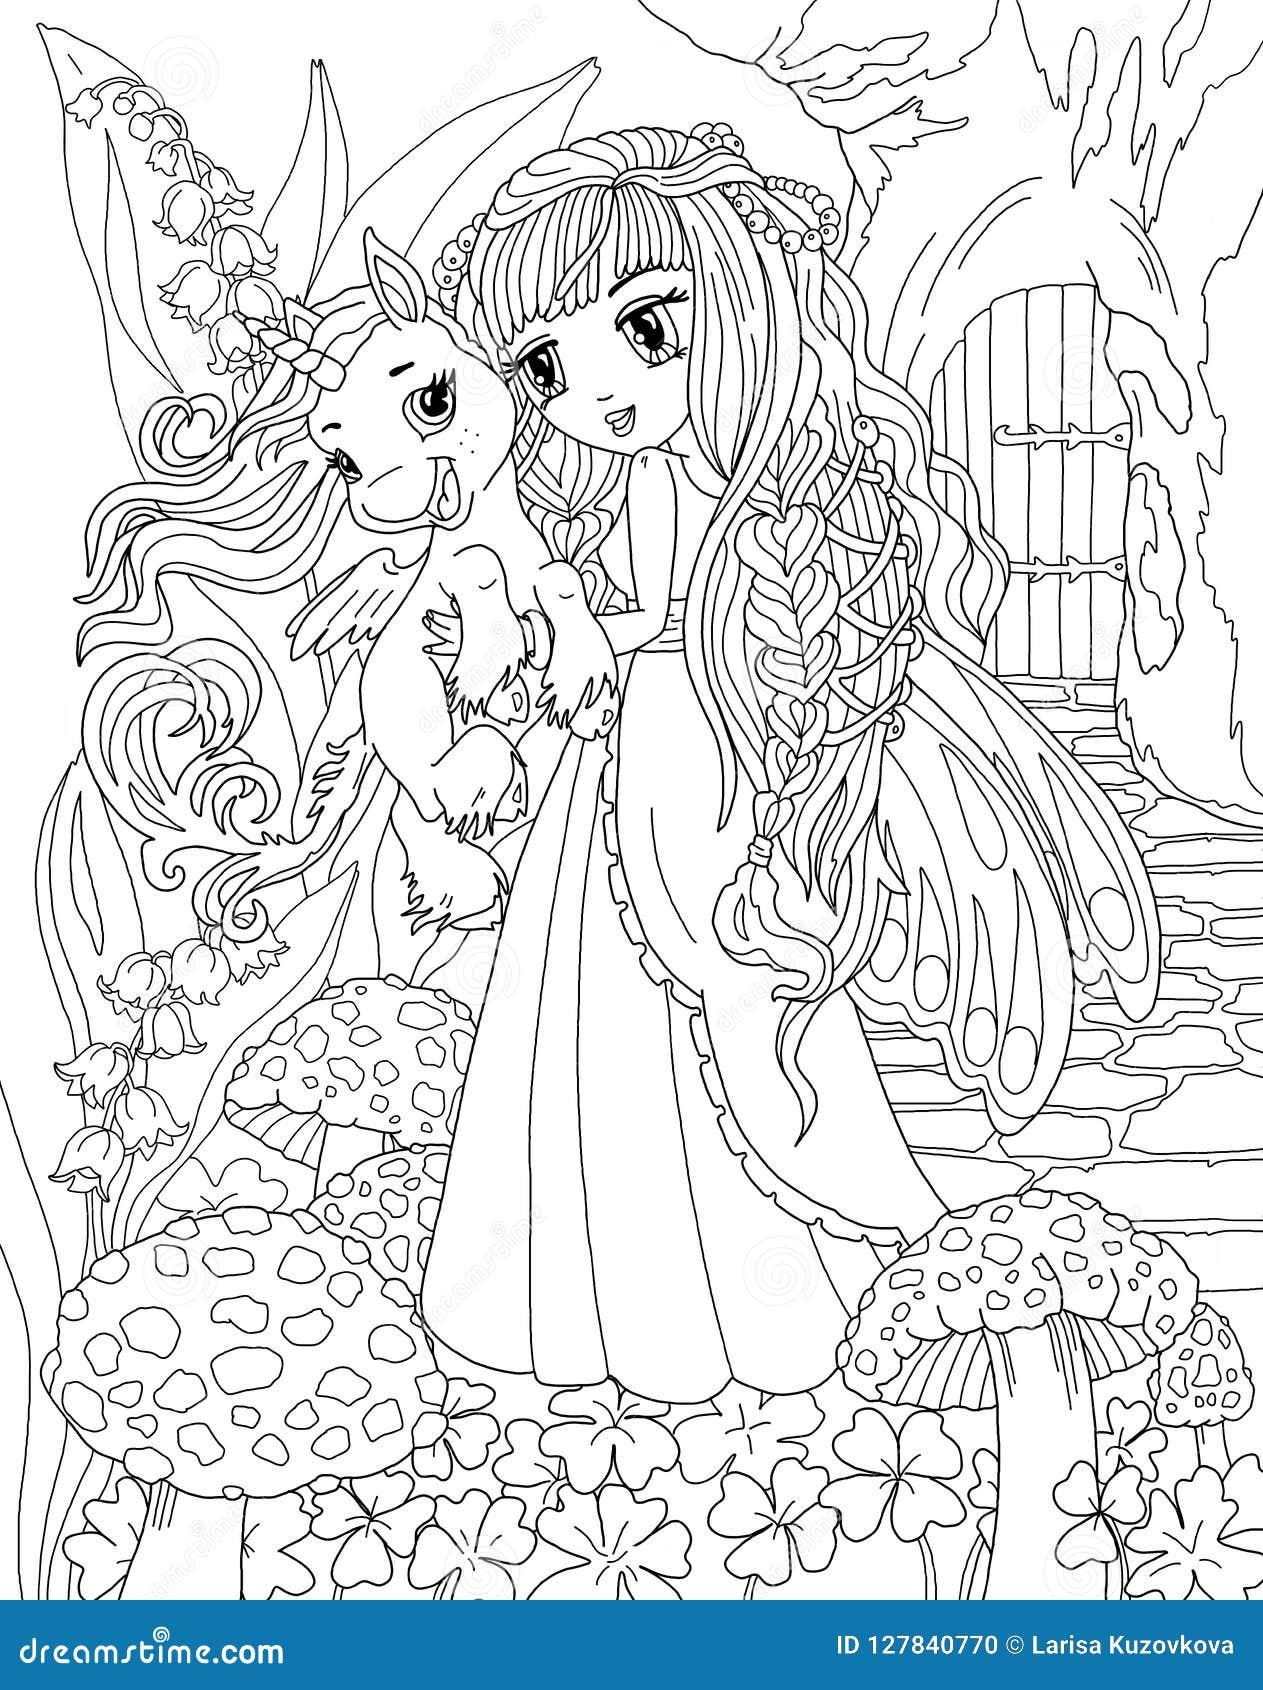 Coloring page the unicorn and princess stock illustration